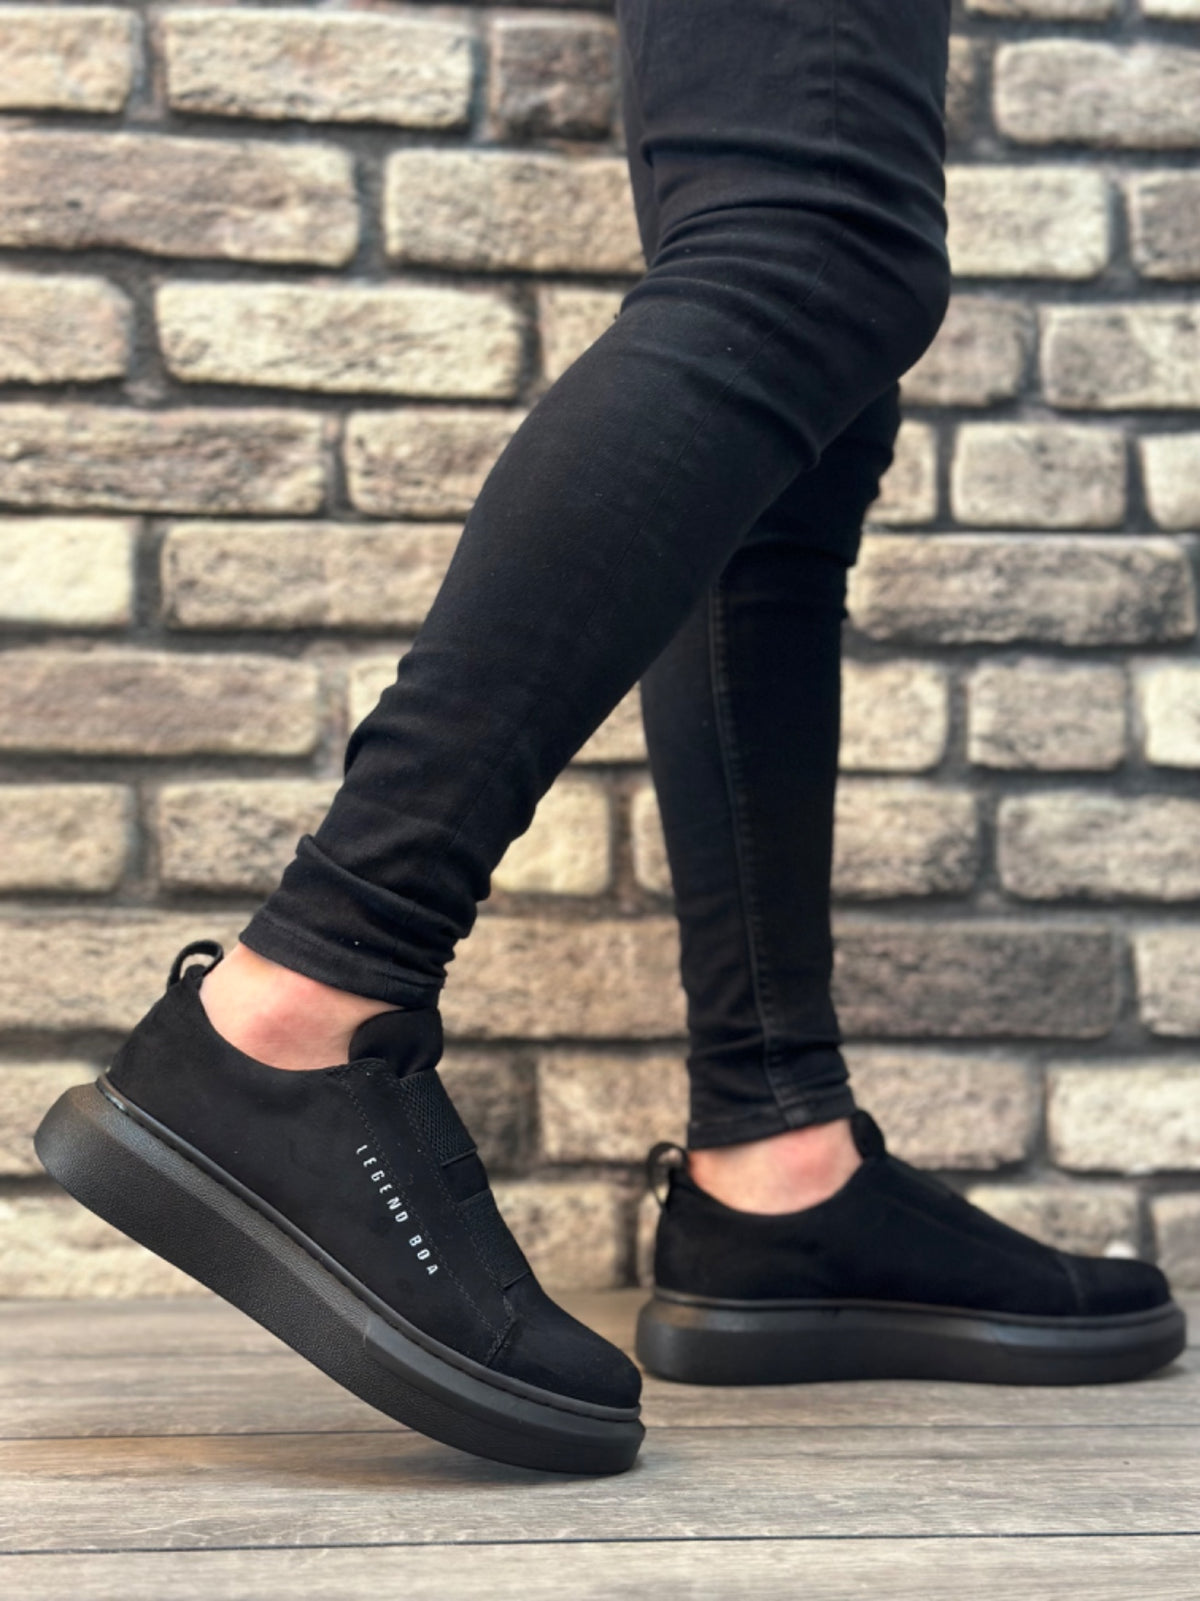 BA0307 Thick Suede High Sole Double Band Black Men's Shoes Sneakers - STREETMODE™